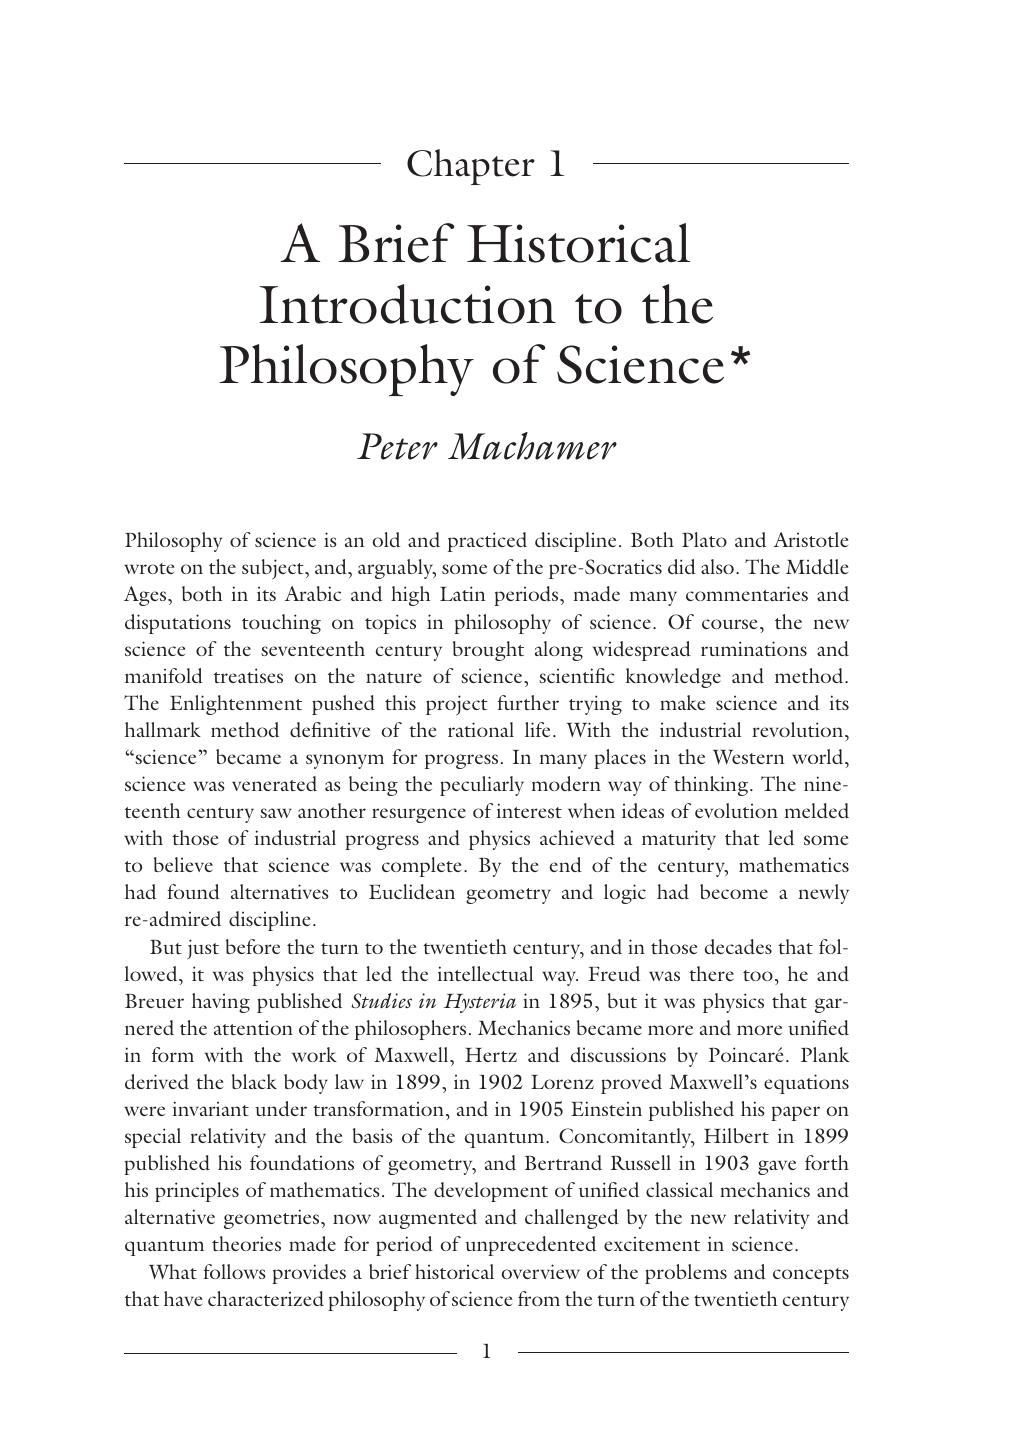 A Brief Historical Introduction to the Philosophy of Science - Chapter 1